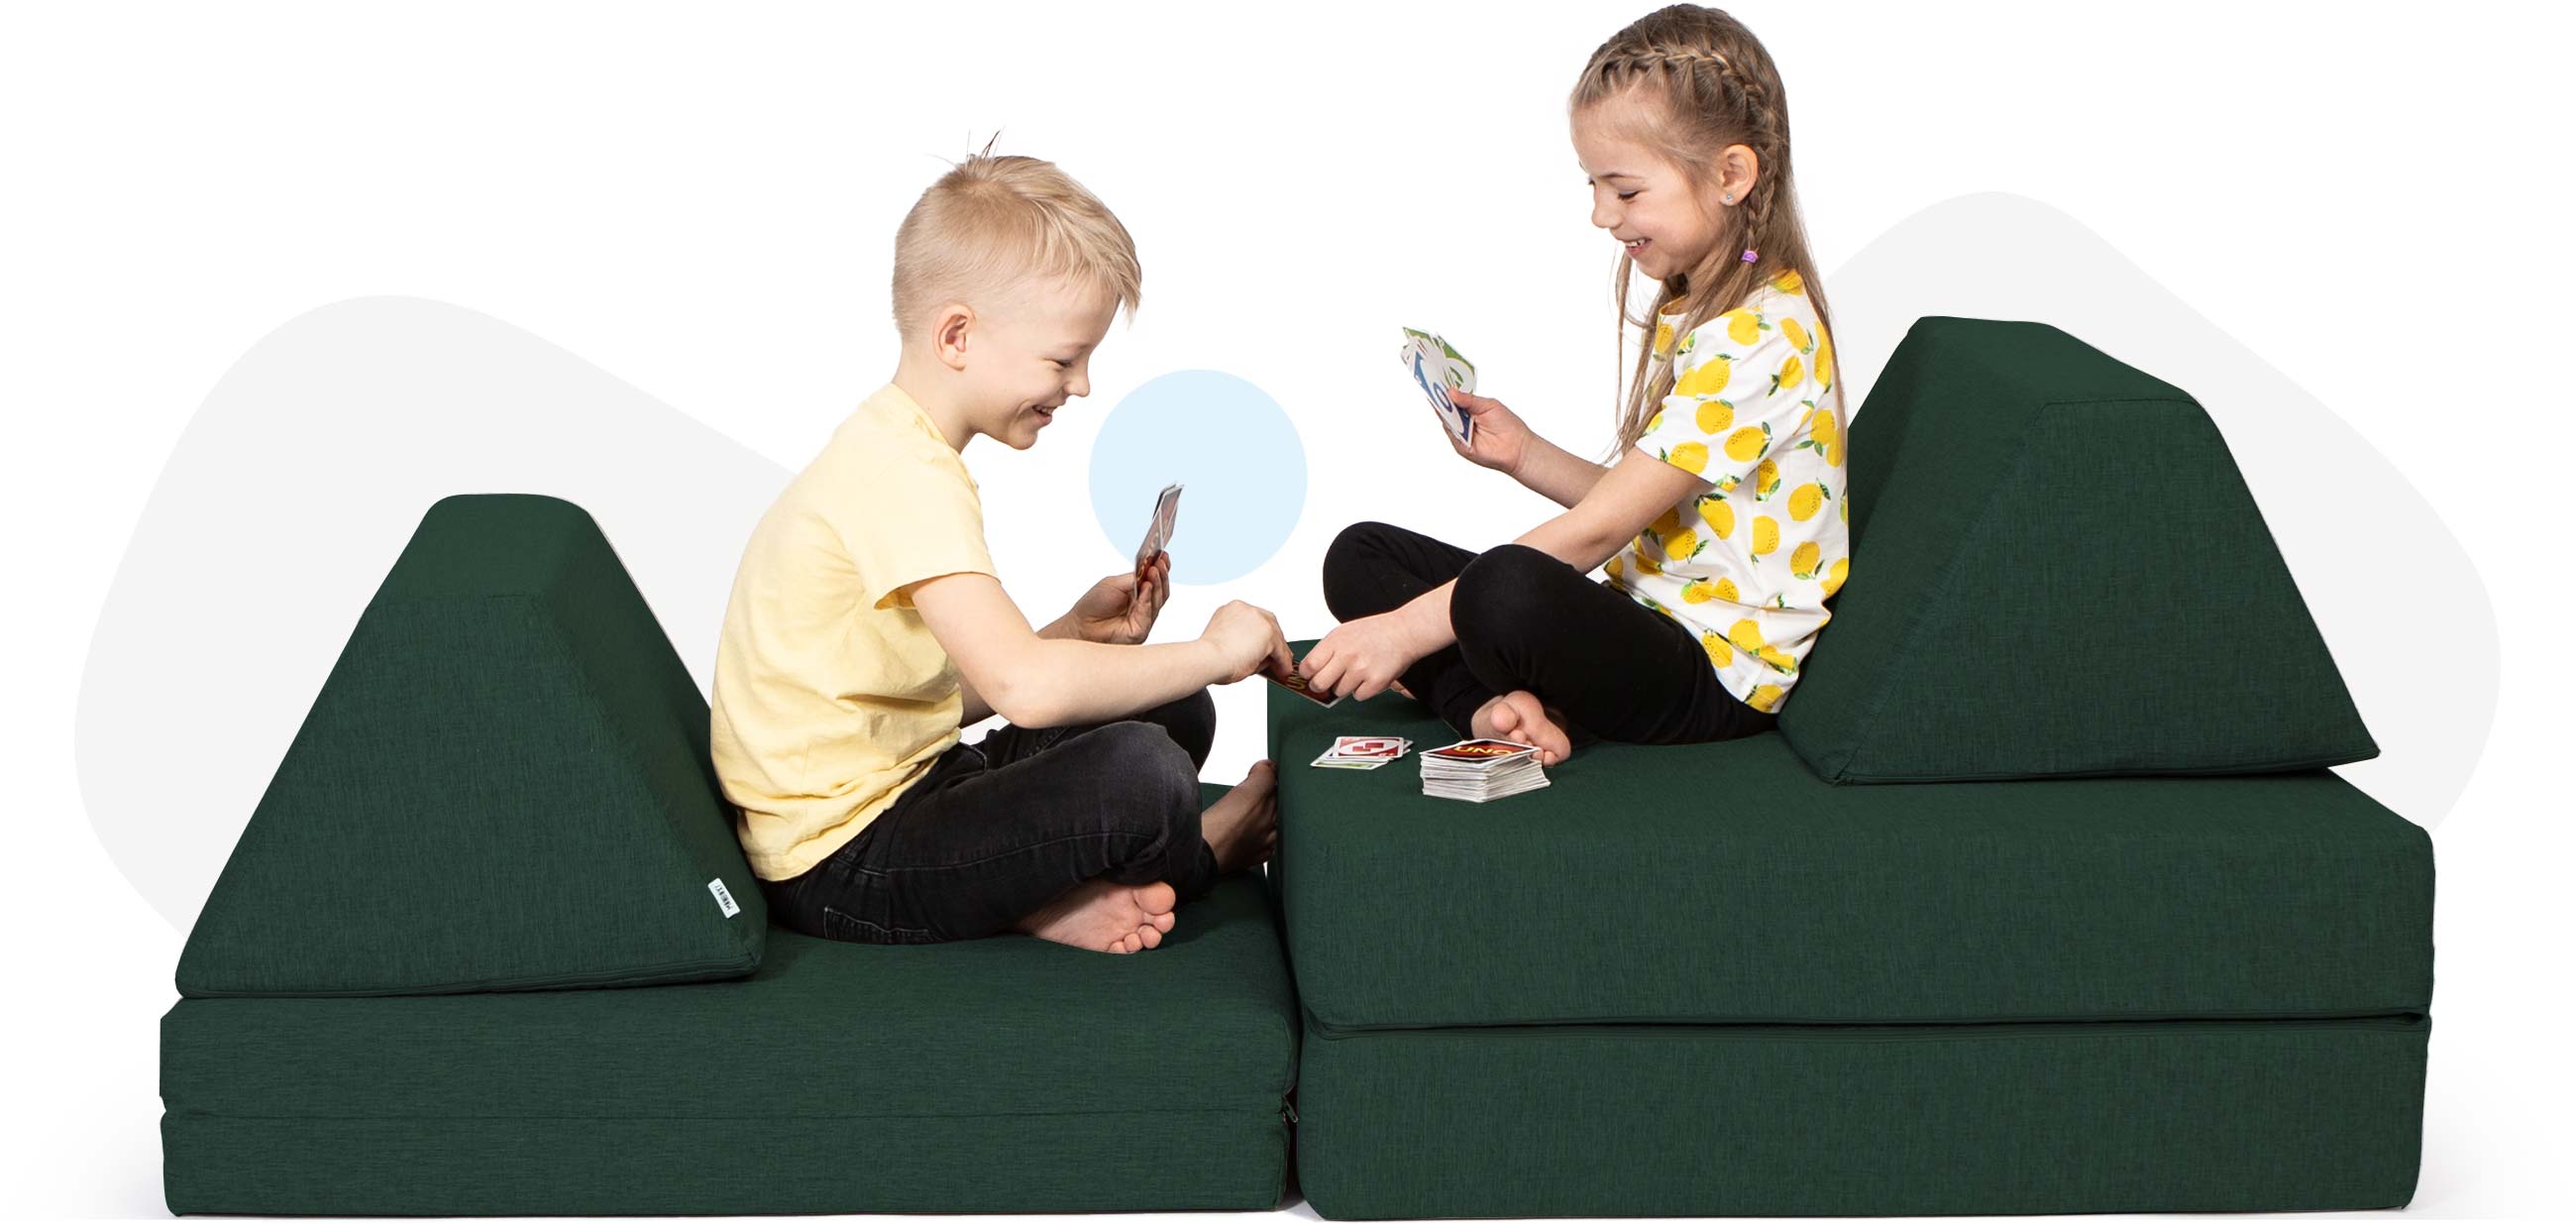 Kids sitting and playing cards on a deep green Monboxy sofa